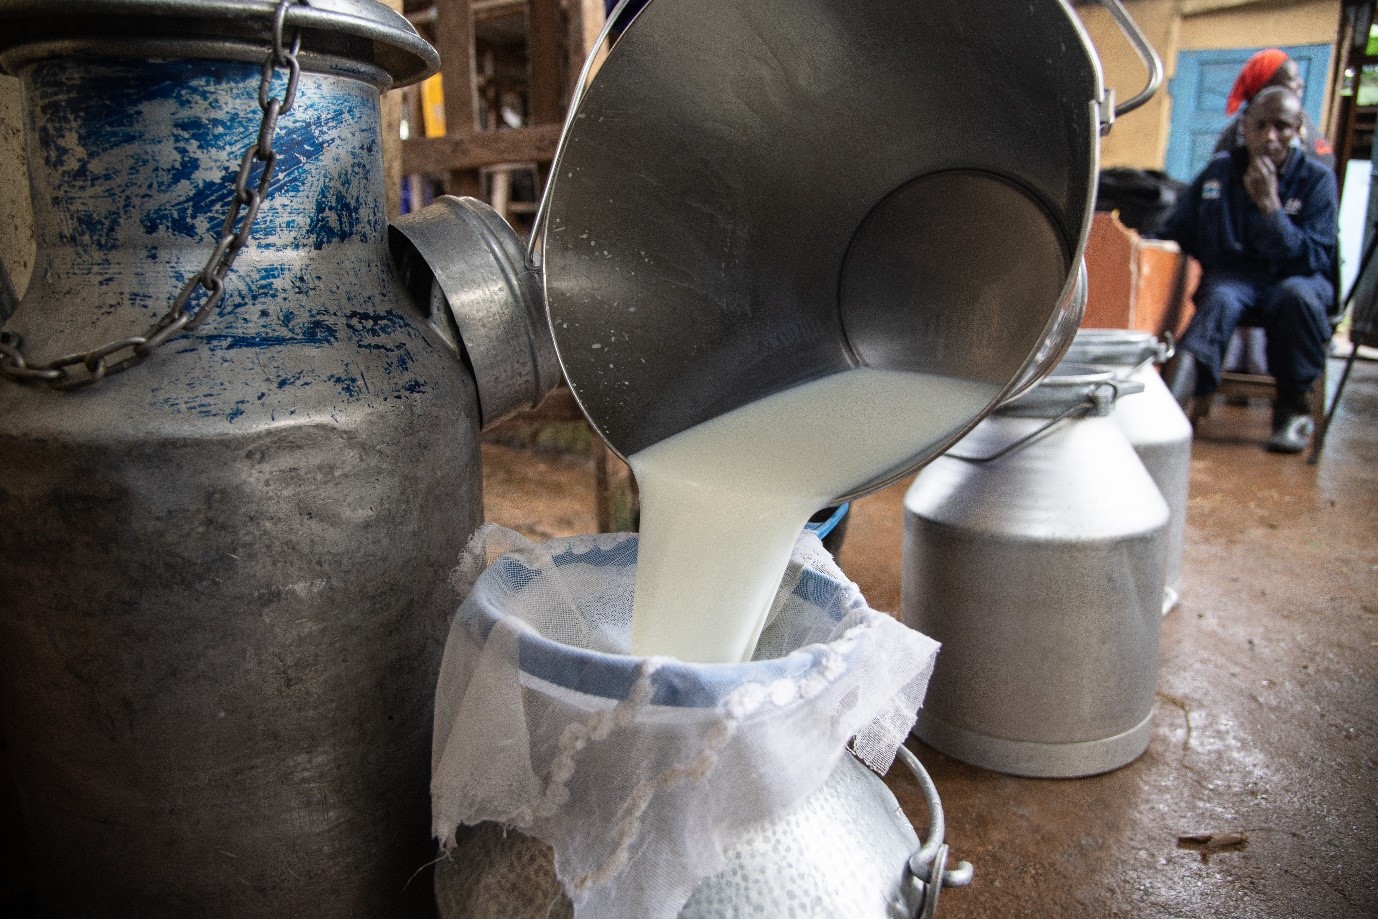 Milking time at Simon and Sylvia Kiruja’s dairy farm in Meru, Kenya. The family is among those who have received training and new technology like the Brachiaria fodder grass varieties to improve milk yields. (Photo: Georgina Smith).